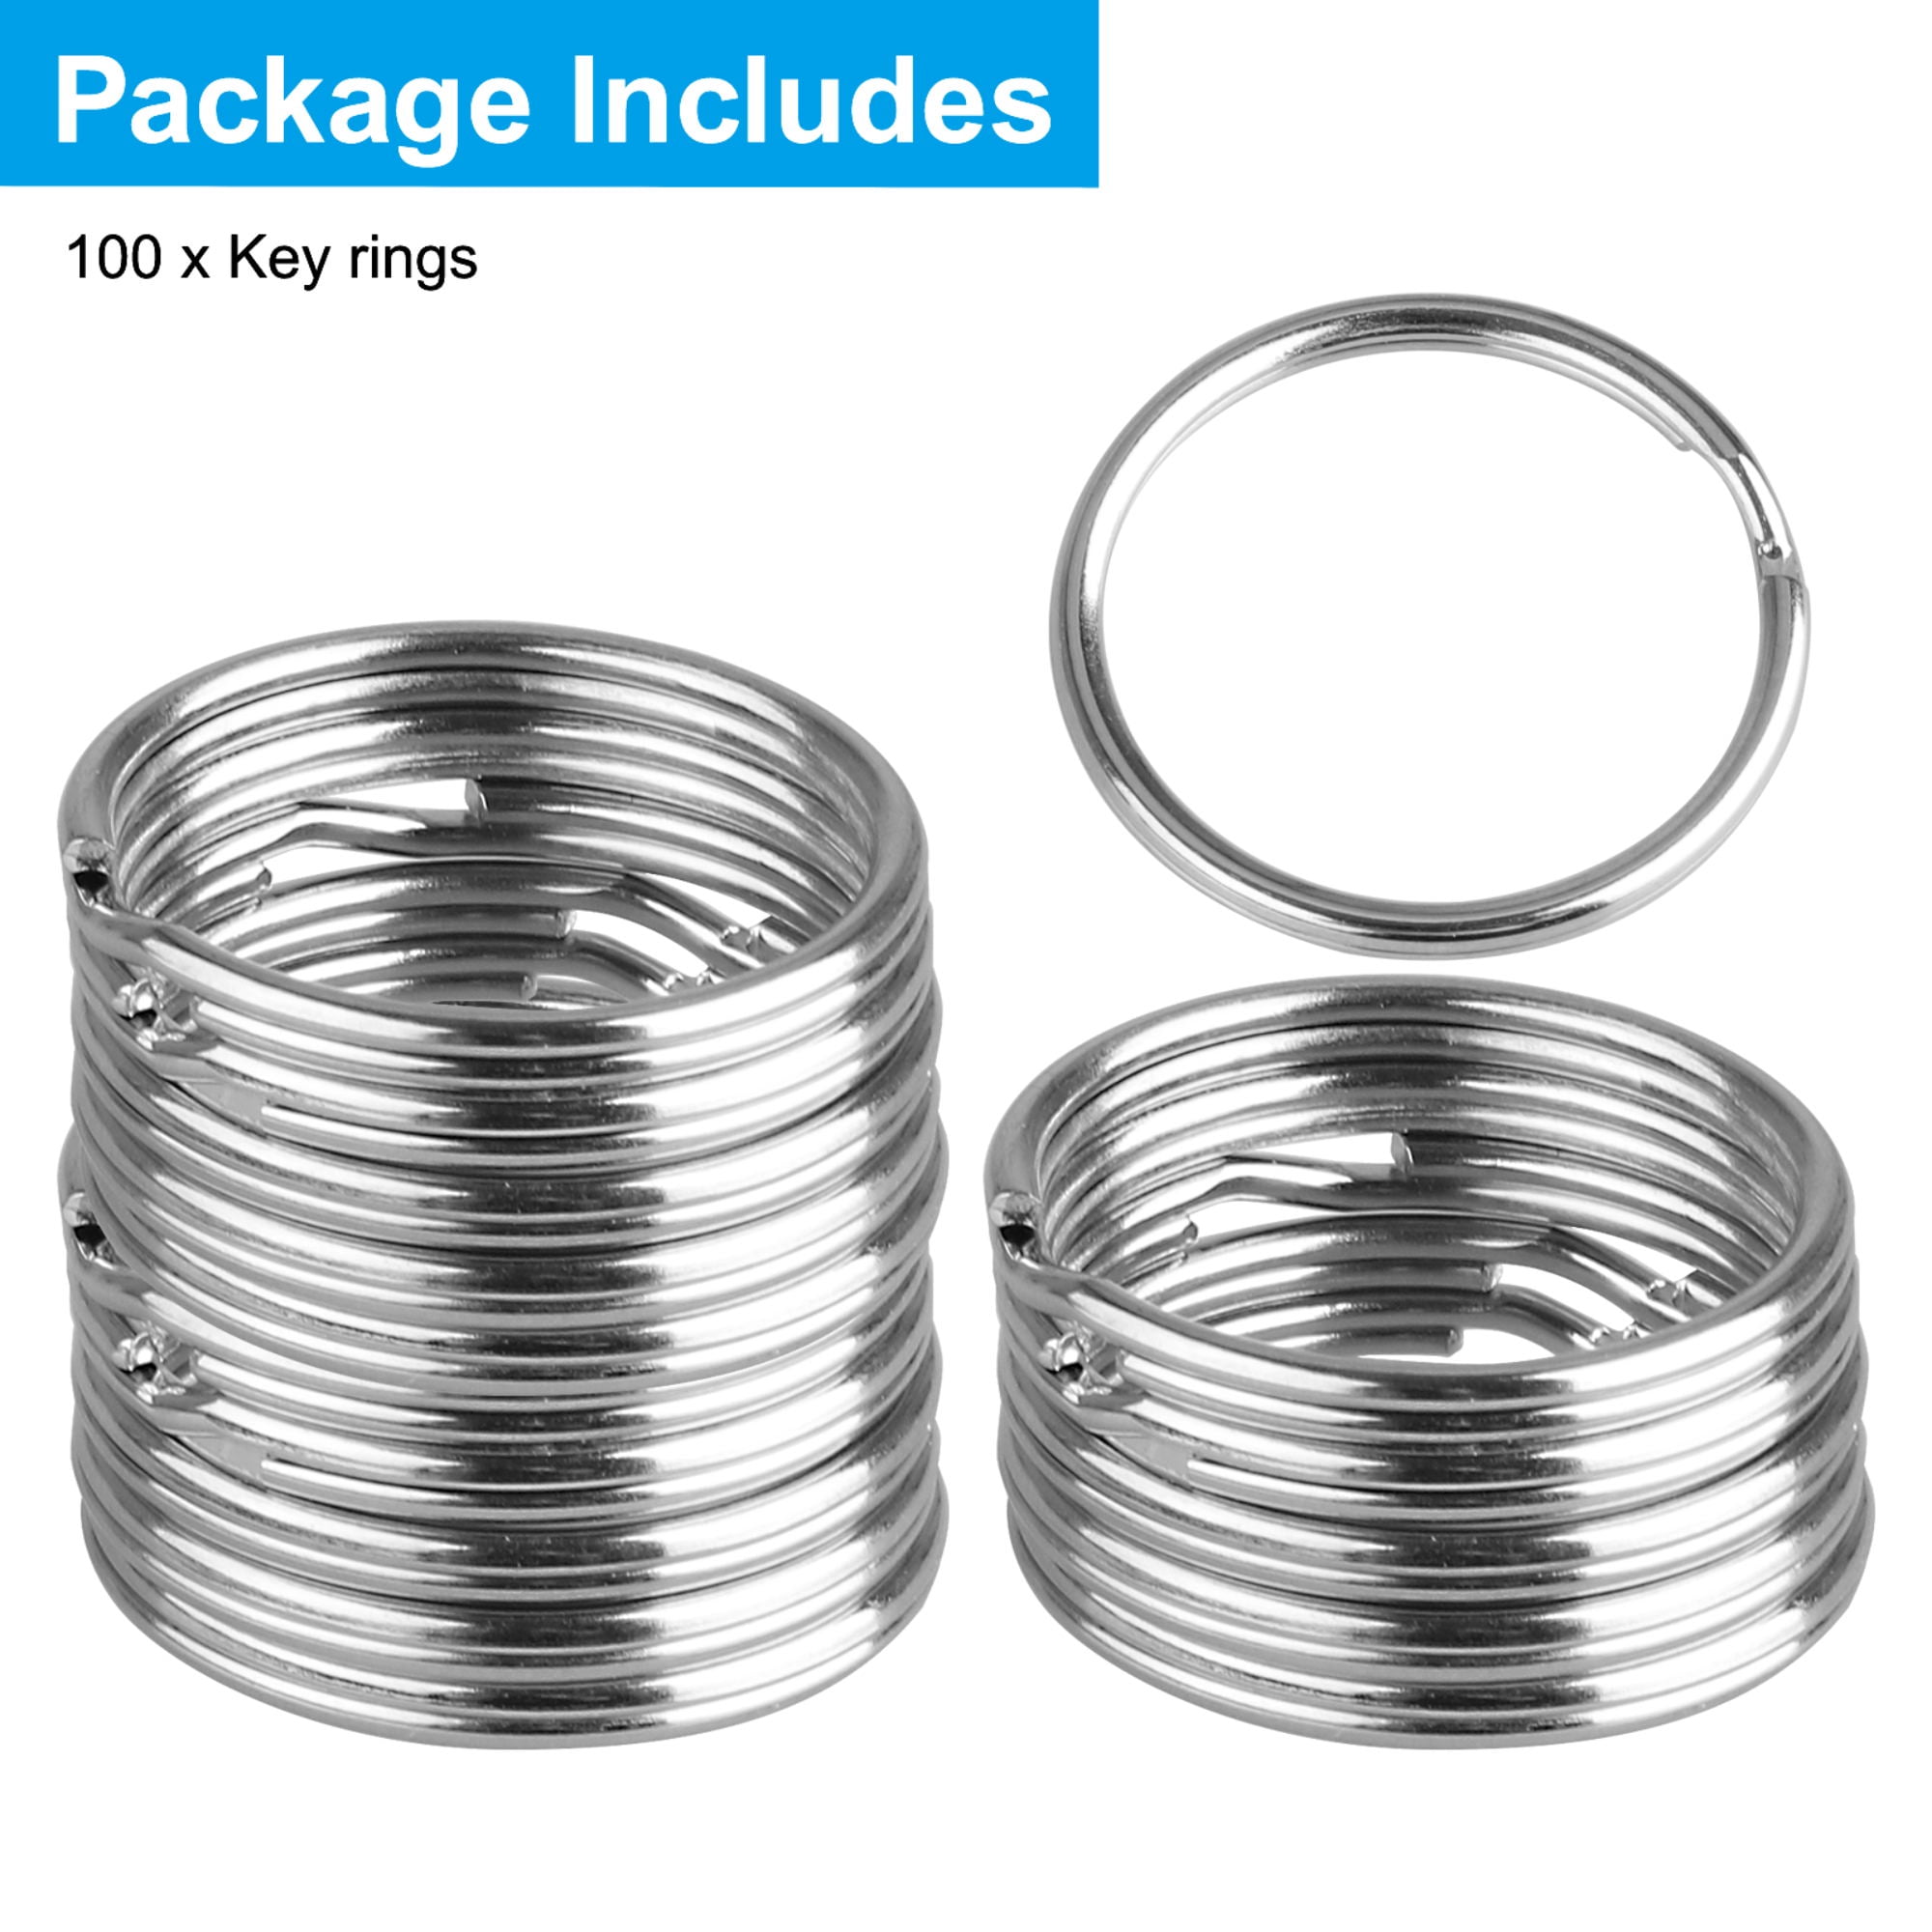 HoAoOo Key Ring/Key Chain, 50 Pack 1.25 Inches 32mm Split Round Metal Silver Keyring for Home/Car/Outdoor/Arts/Lanyards/CraftsKeys Organization